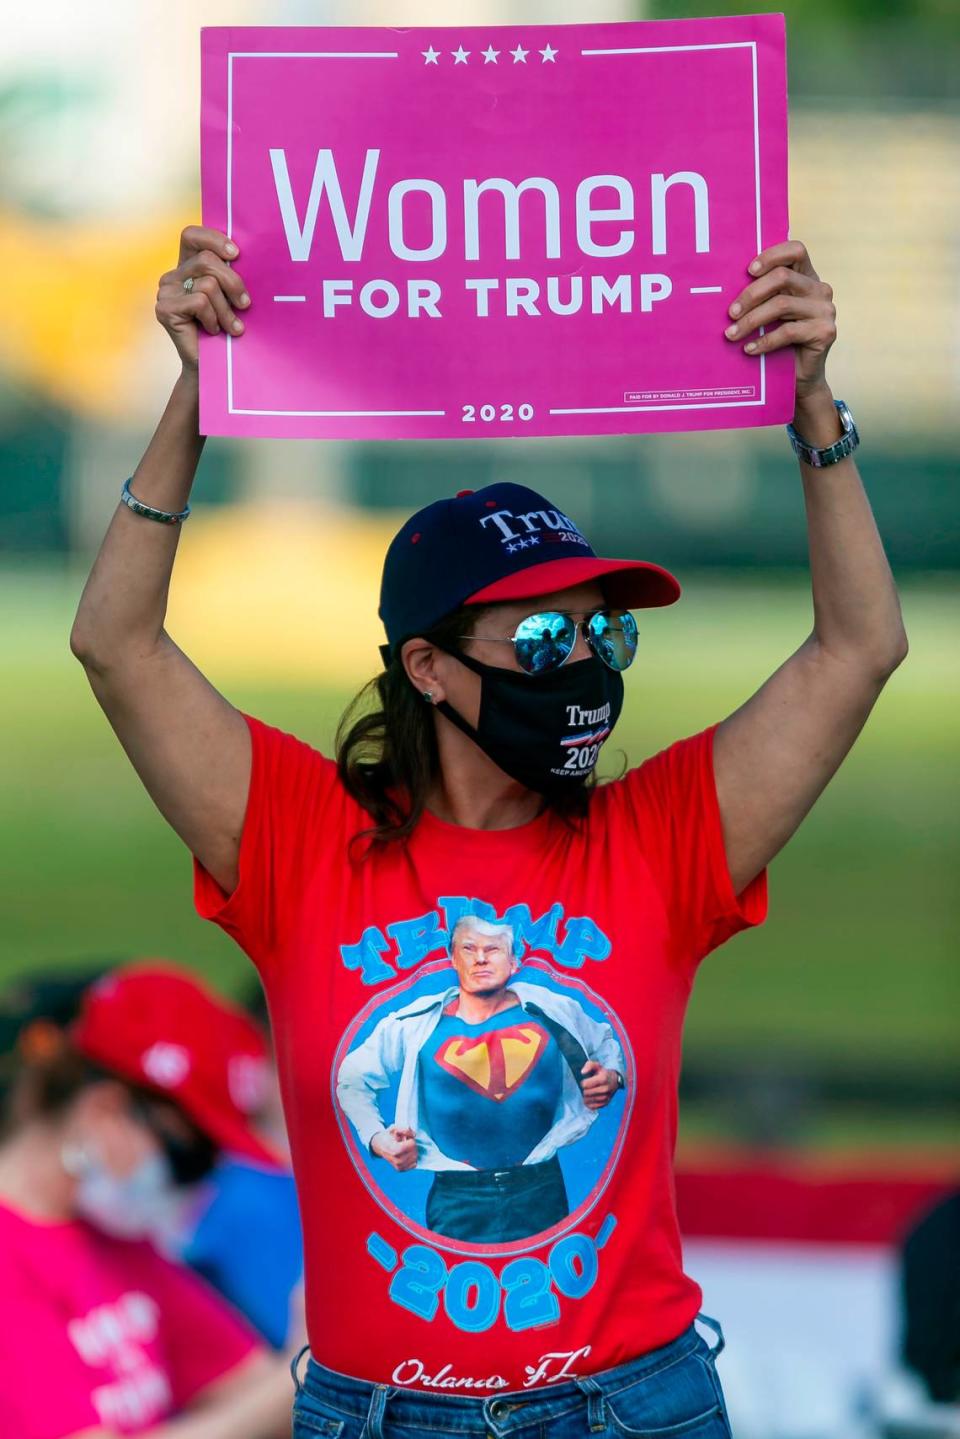 Supporters attend a Vice President Mike Pence campaign rally near the Cuban Memorial Monument in Tamiami Park on Thursday, October 15, 2020 in Miami, Florida.